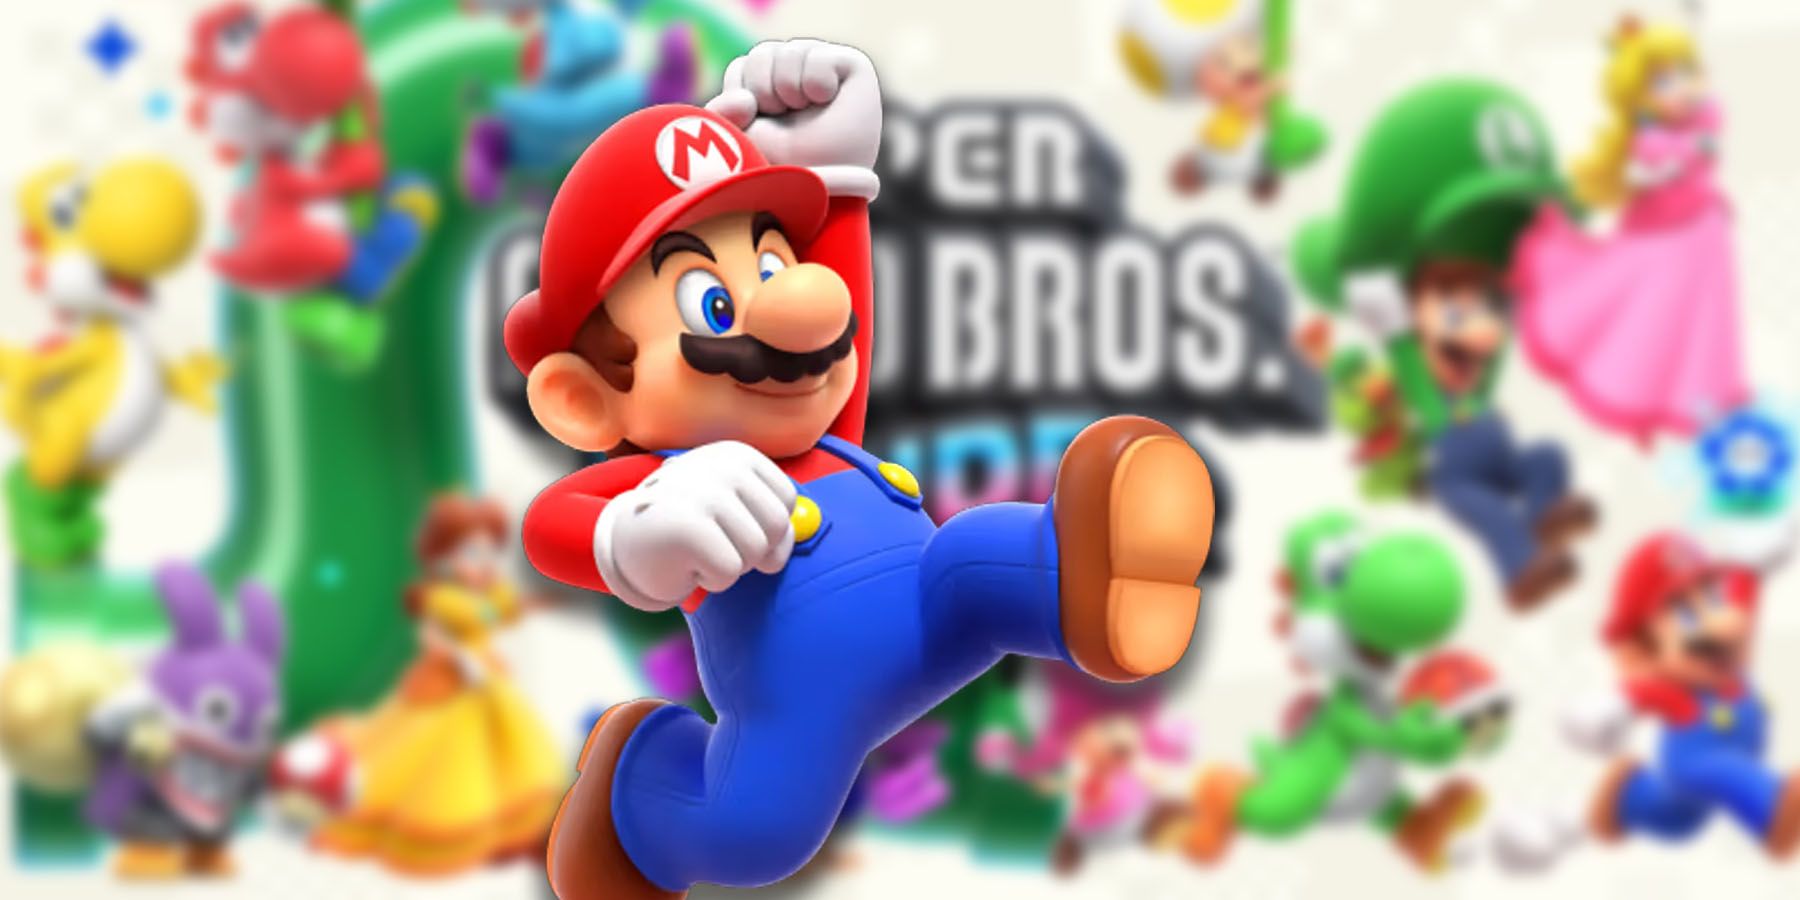 Super Mario Bros. Wonder' is about being nice to people on the